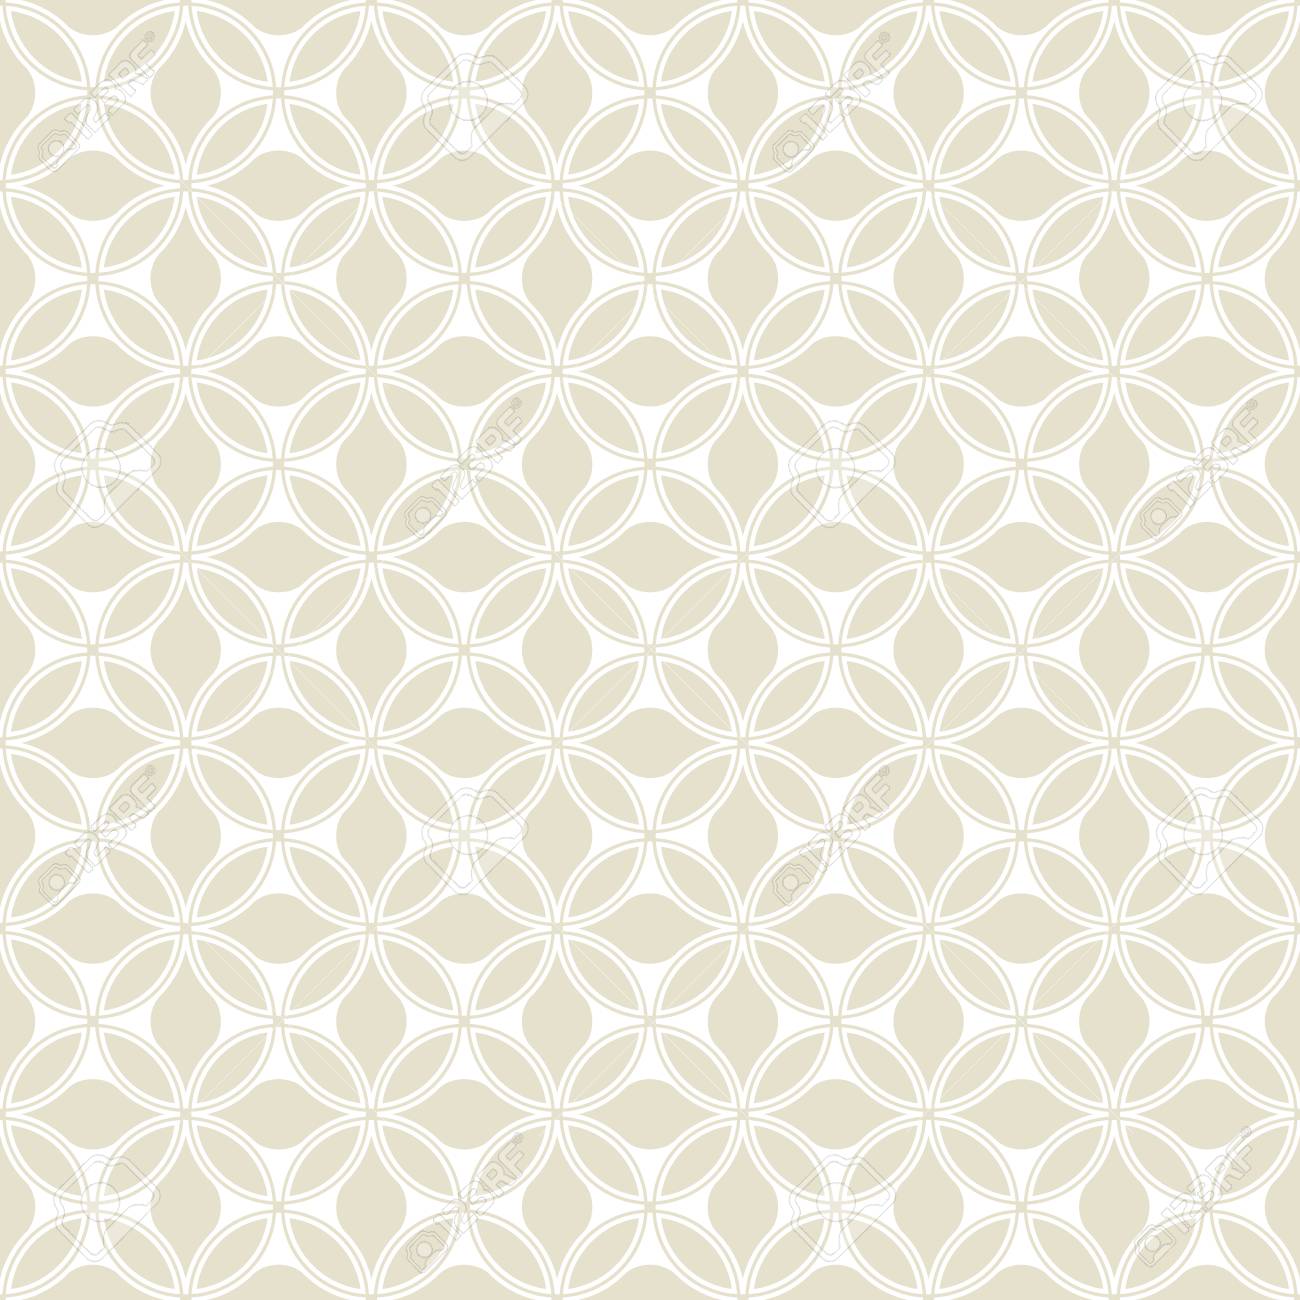 Floral Pattern Wallpaper Seamless Vector Background Beige And